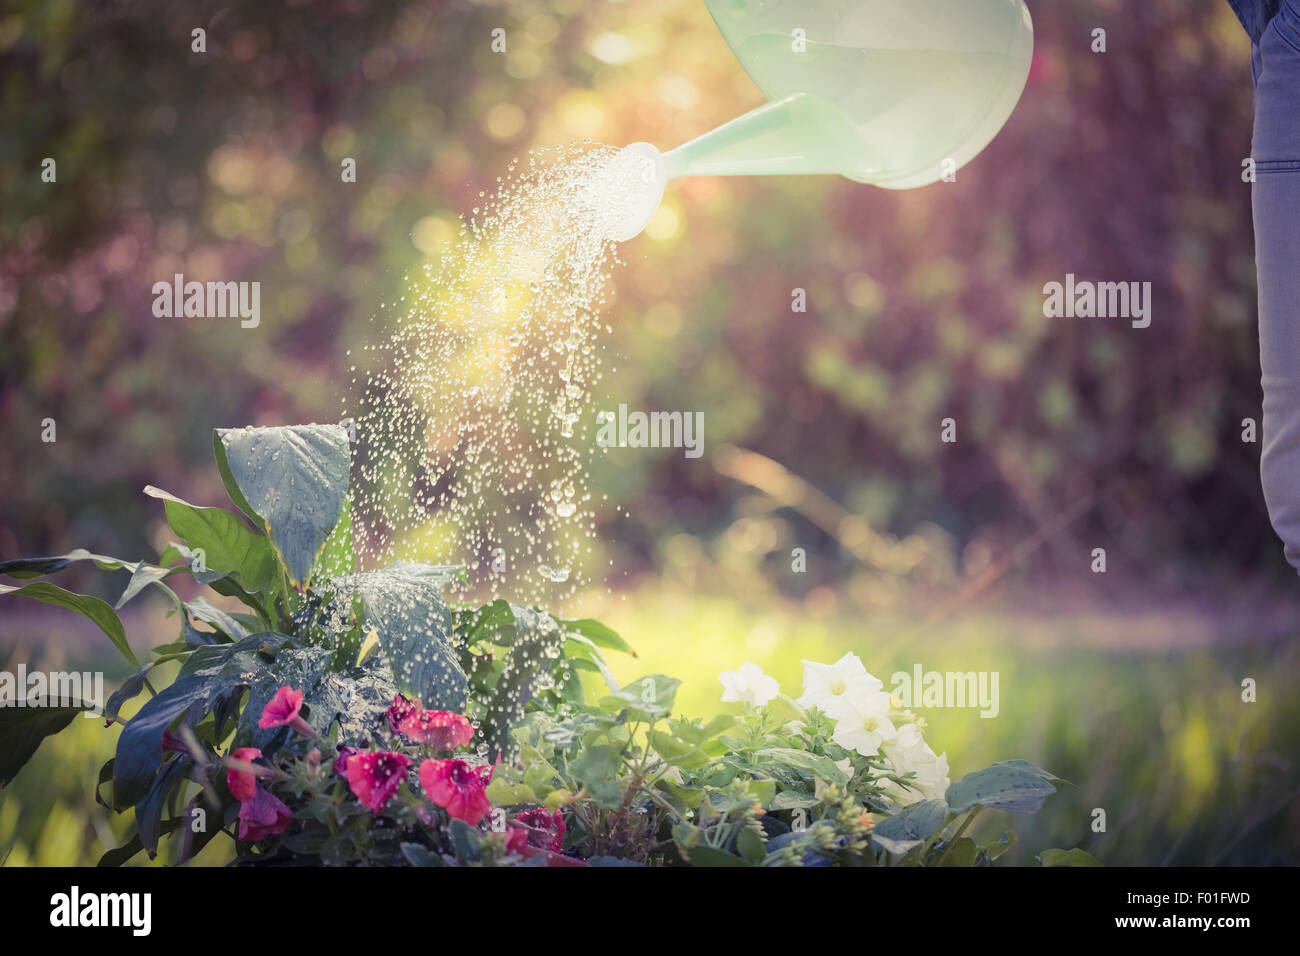 Watering can pouring water over flowers Stock Photo